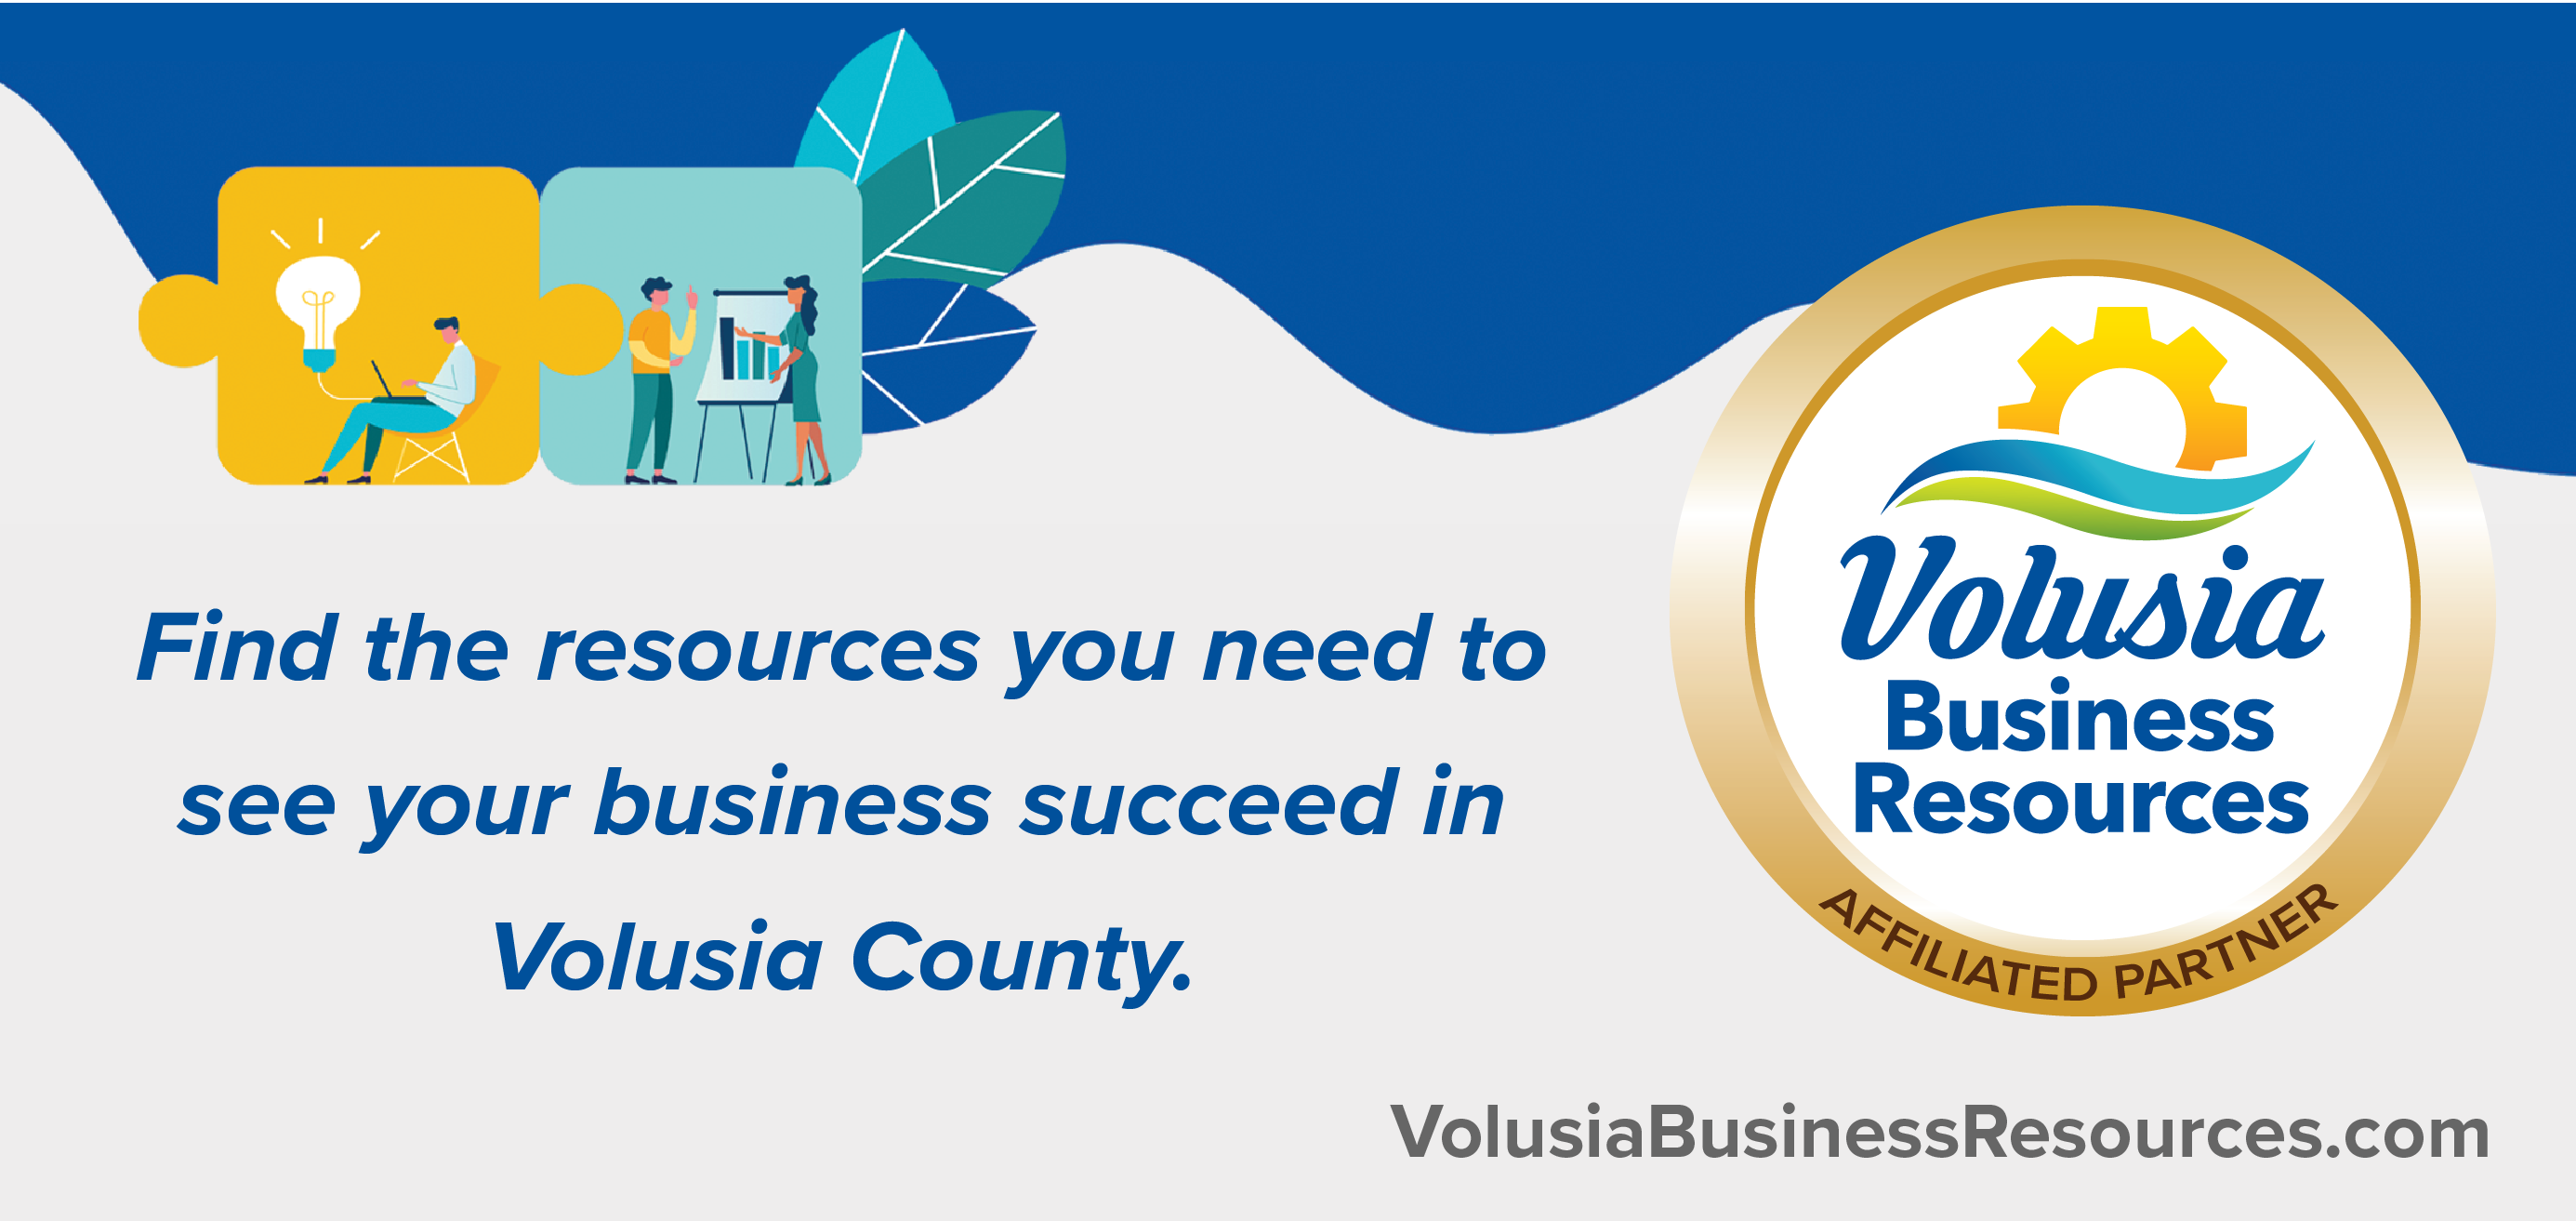 Volusia Business Resources COVID-19 Center. Relaunch Volusia: Small Business Reopening Grant Program